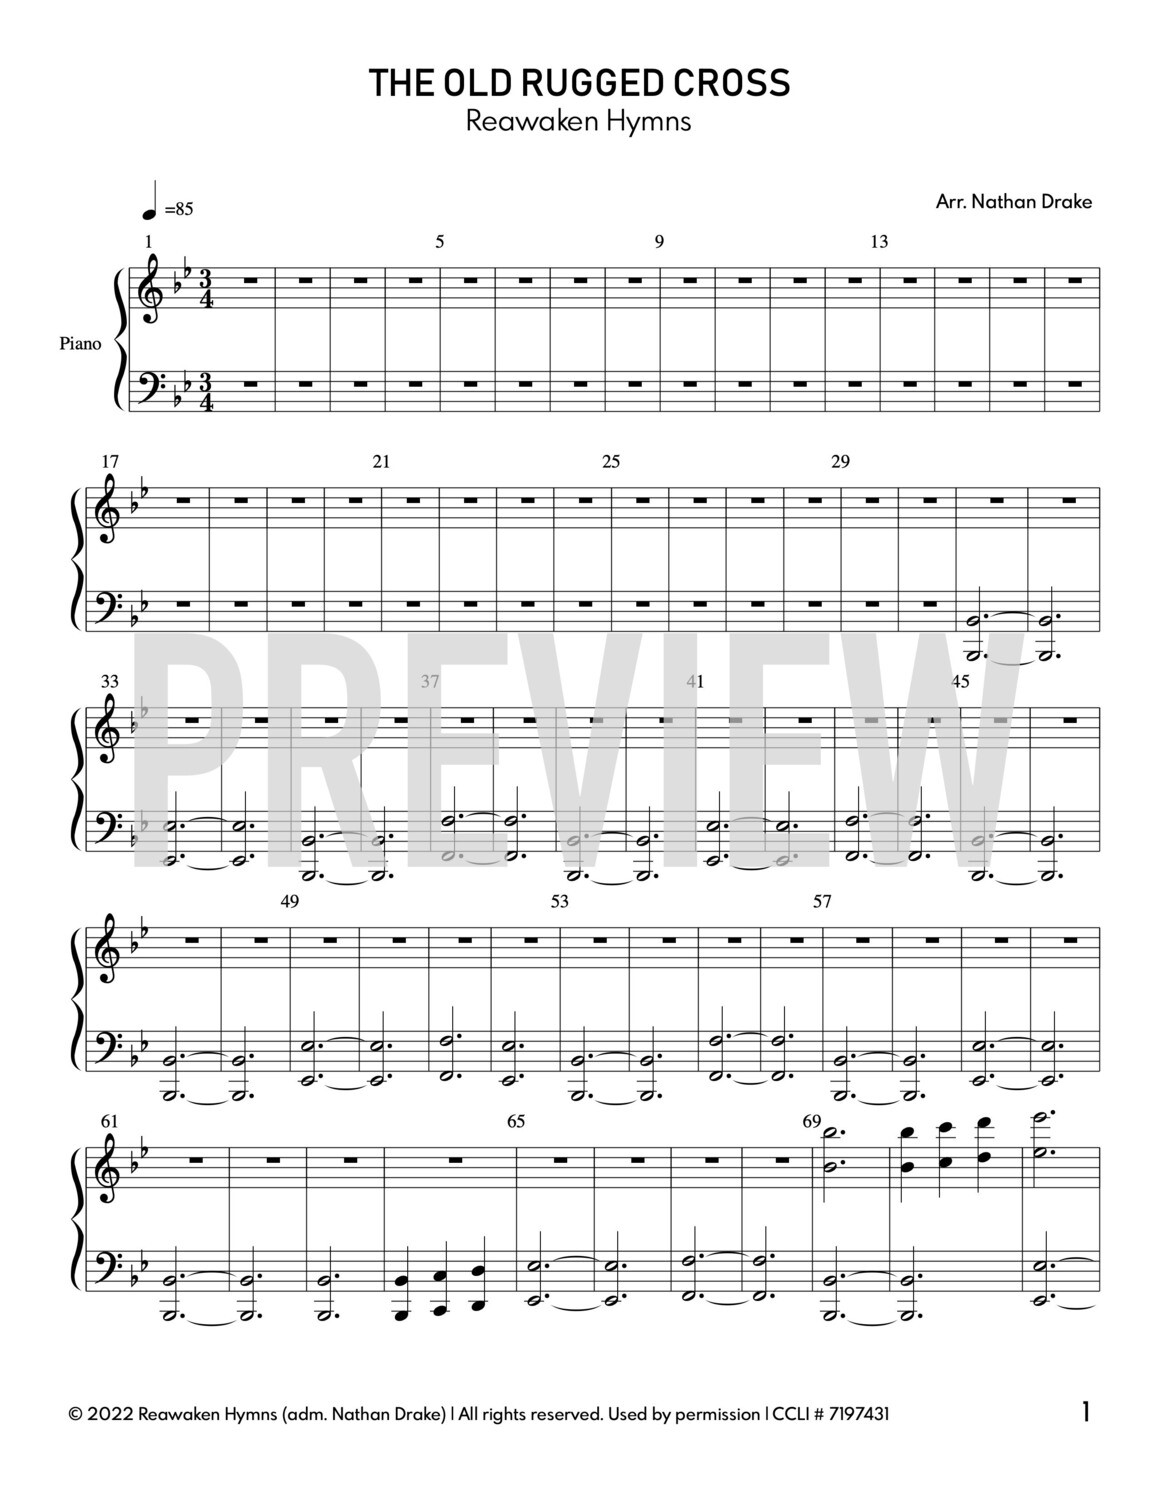 The Old Rugged Cross - Piano Sheet Music (2 parts)